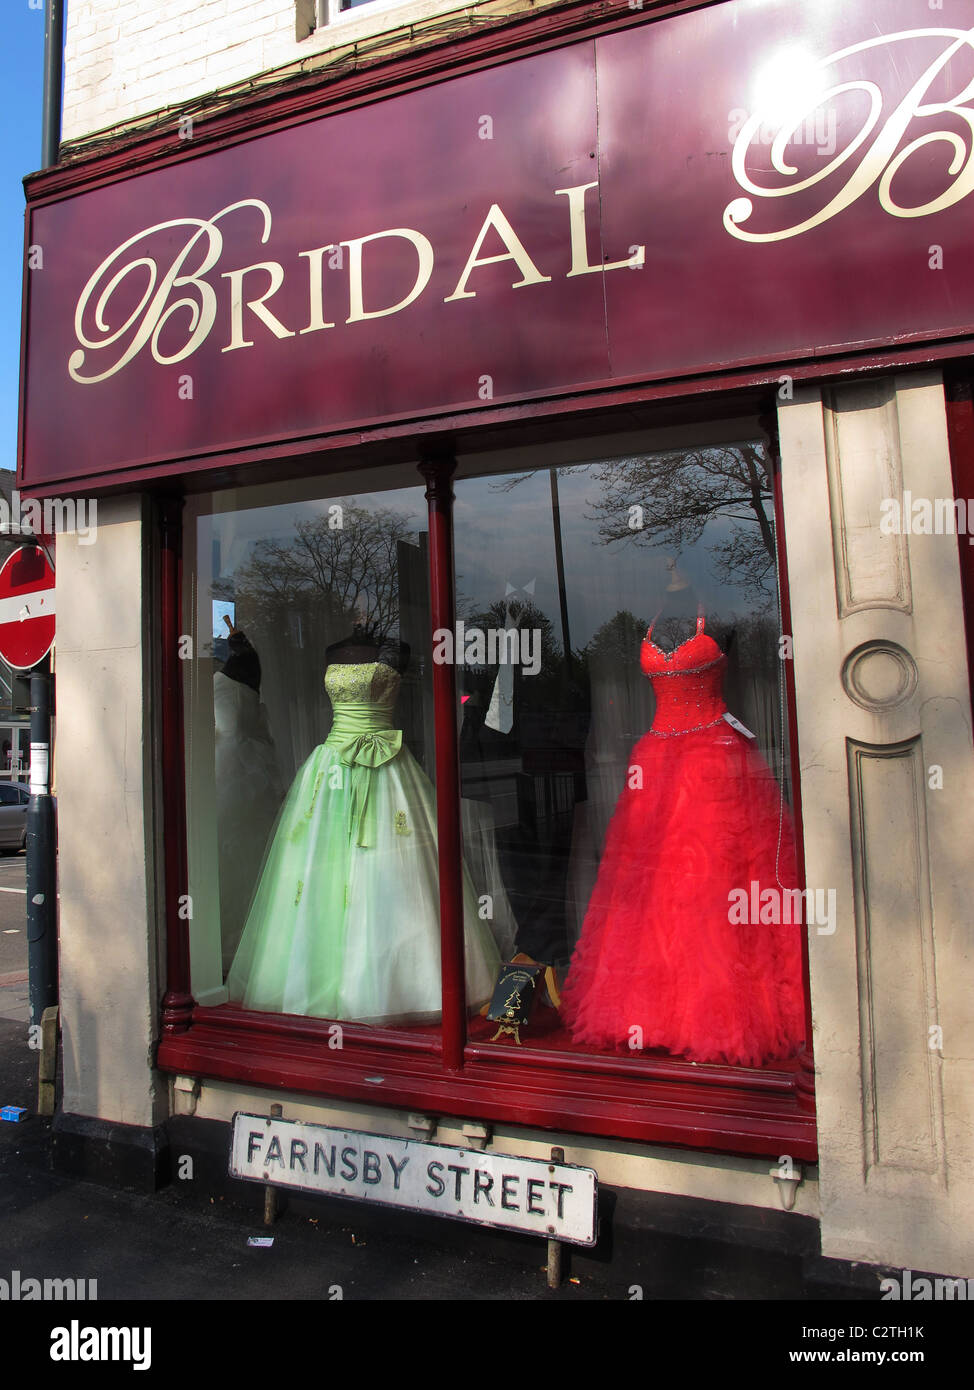 Brightly coloured PINK wedding dress in shop window. Stock Photo